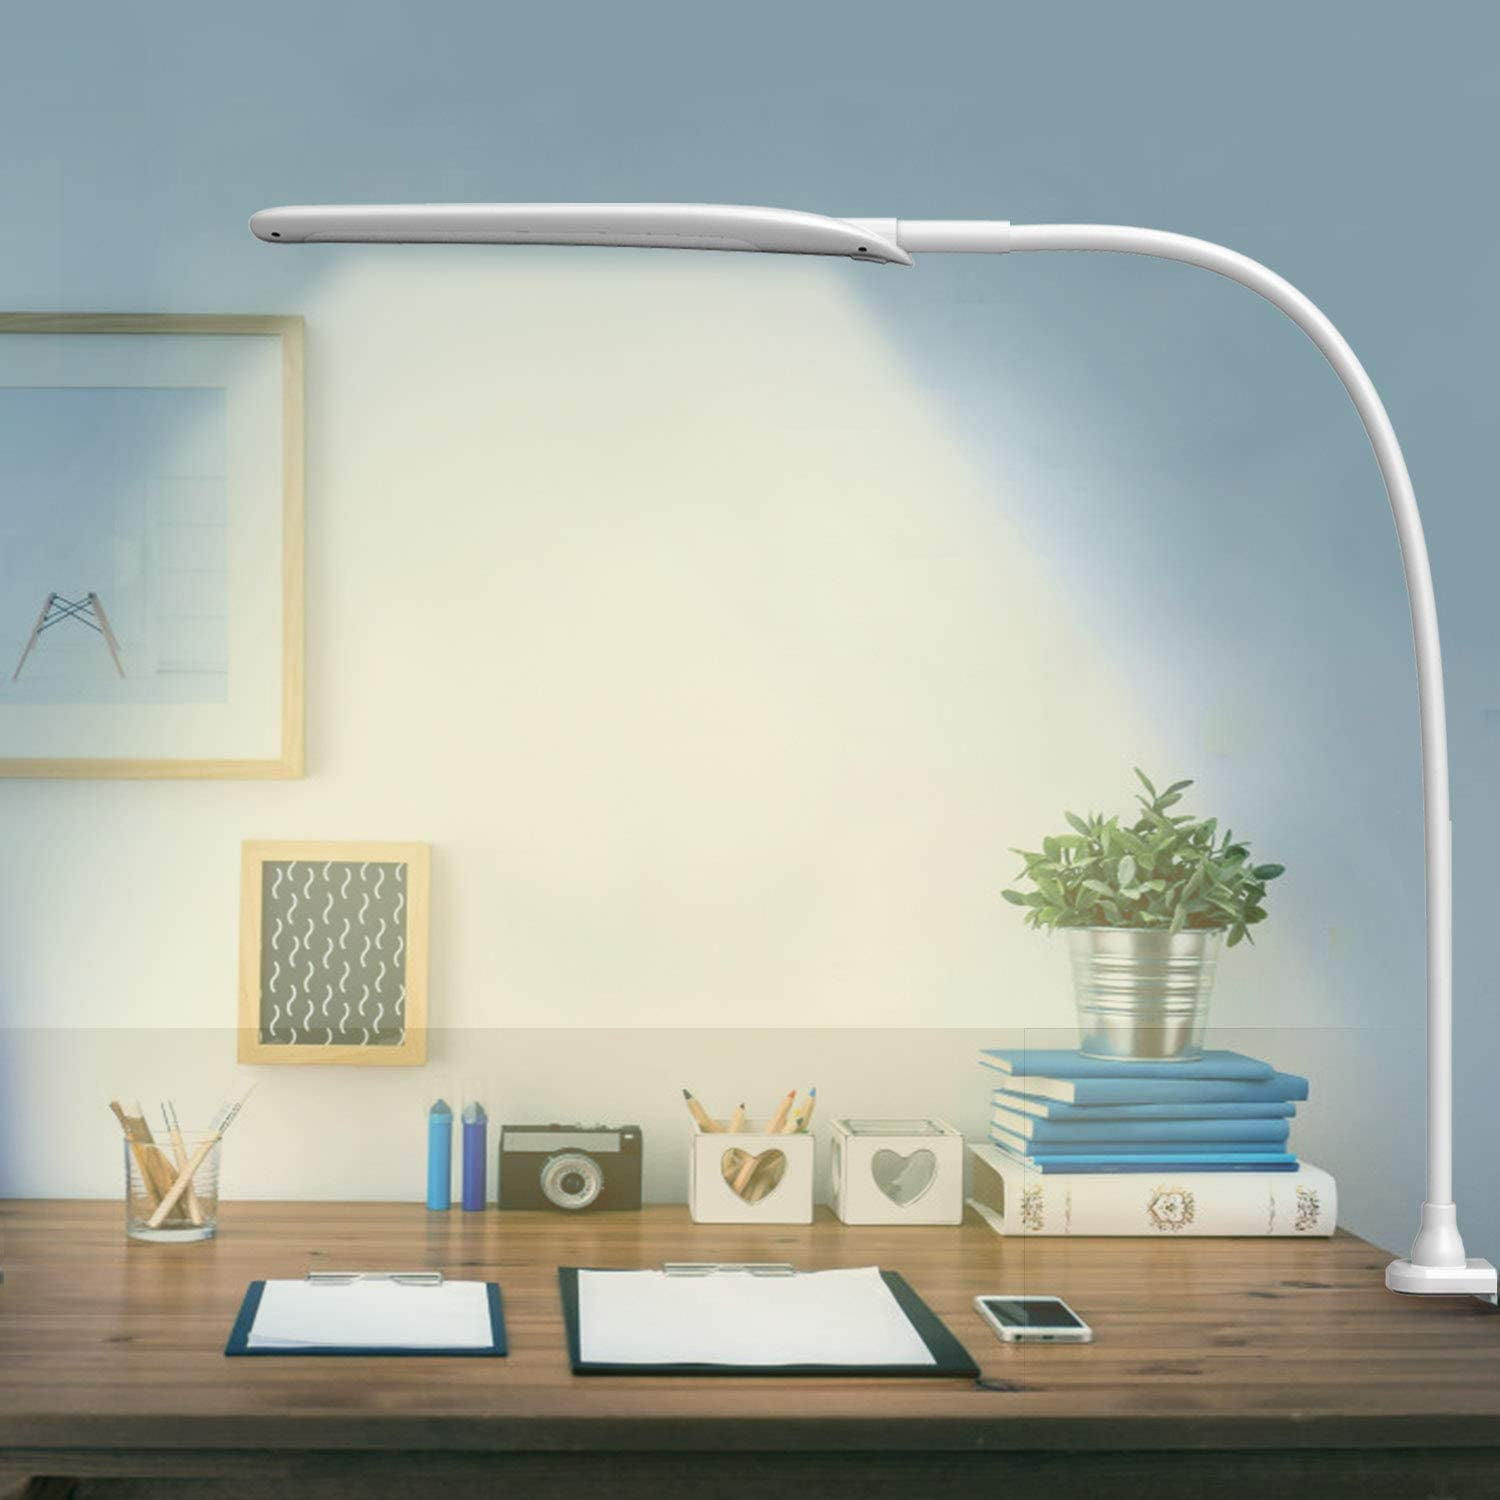 LED Desk Lamp with Clamp,Flexible Gooseneck Clamp Lamp,Dimmable,Touch